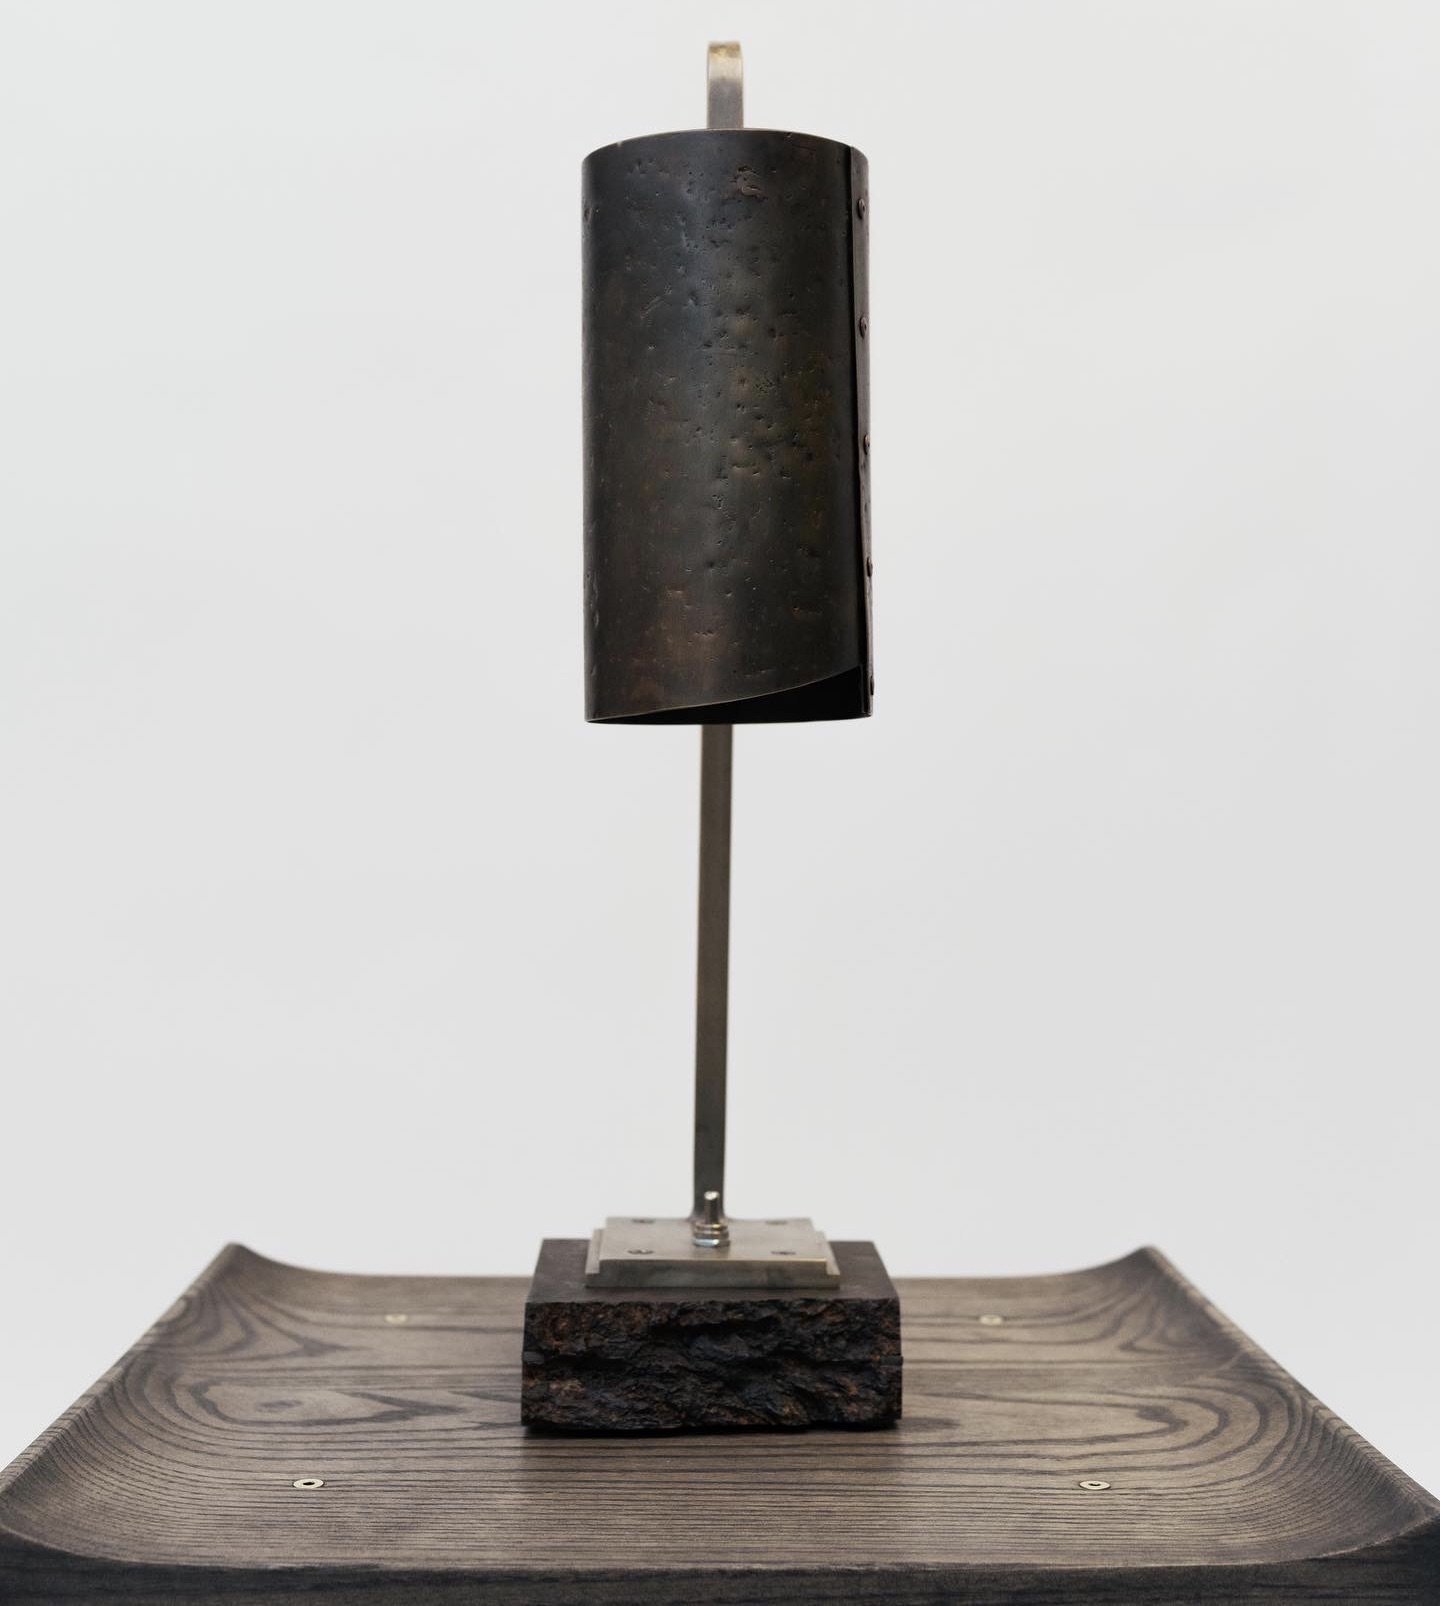 A View Of A Handmade Metal Elio Table Lamp